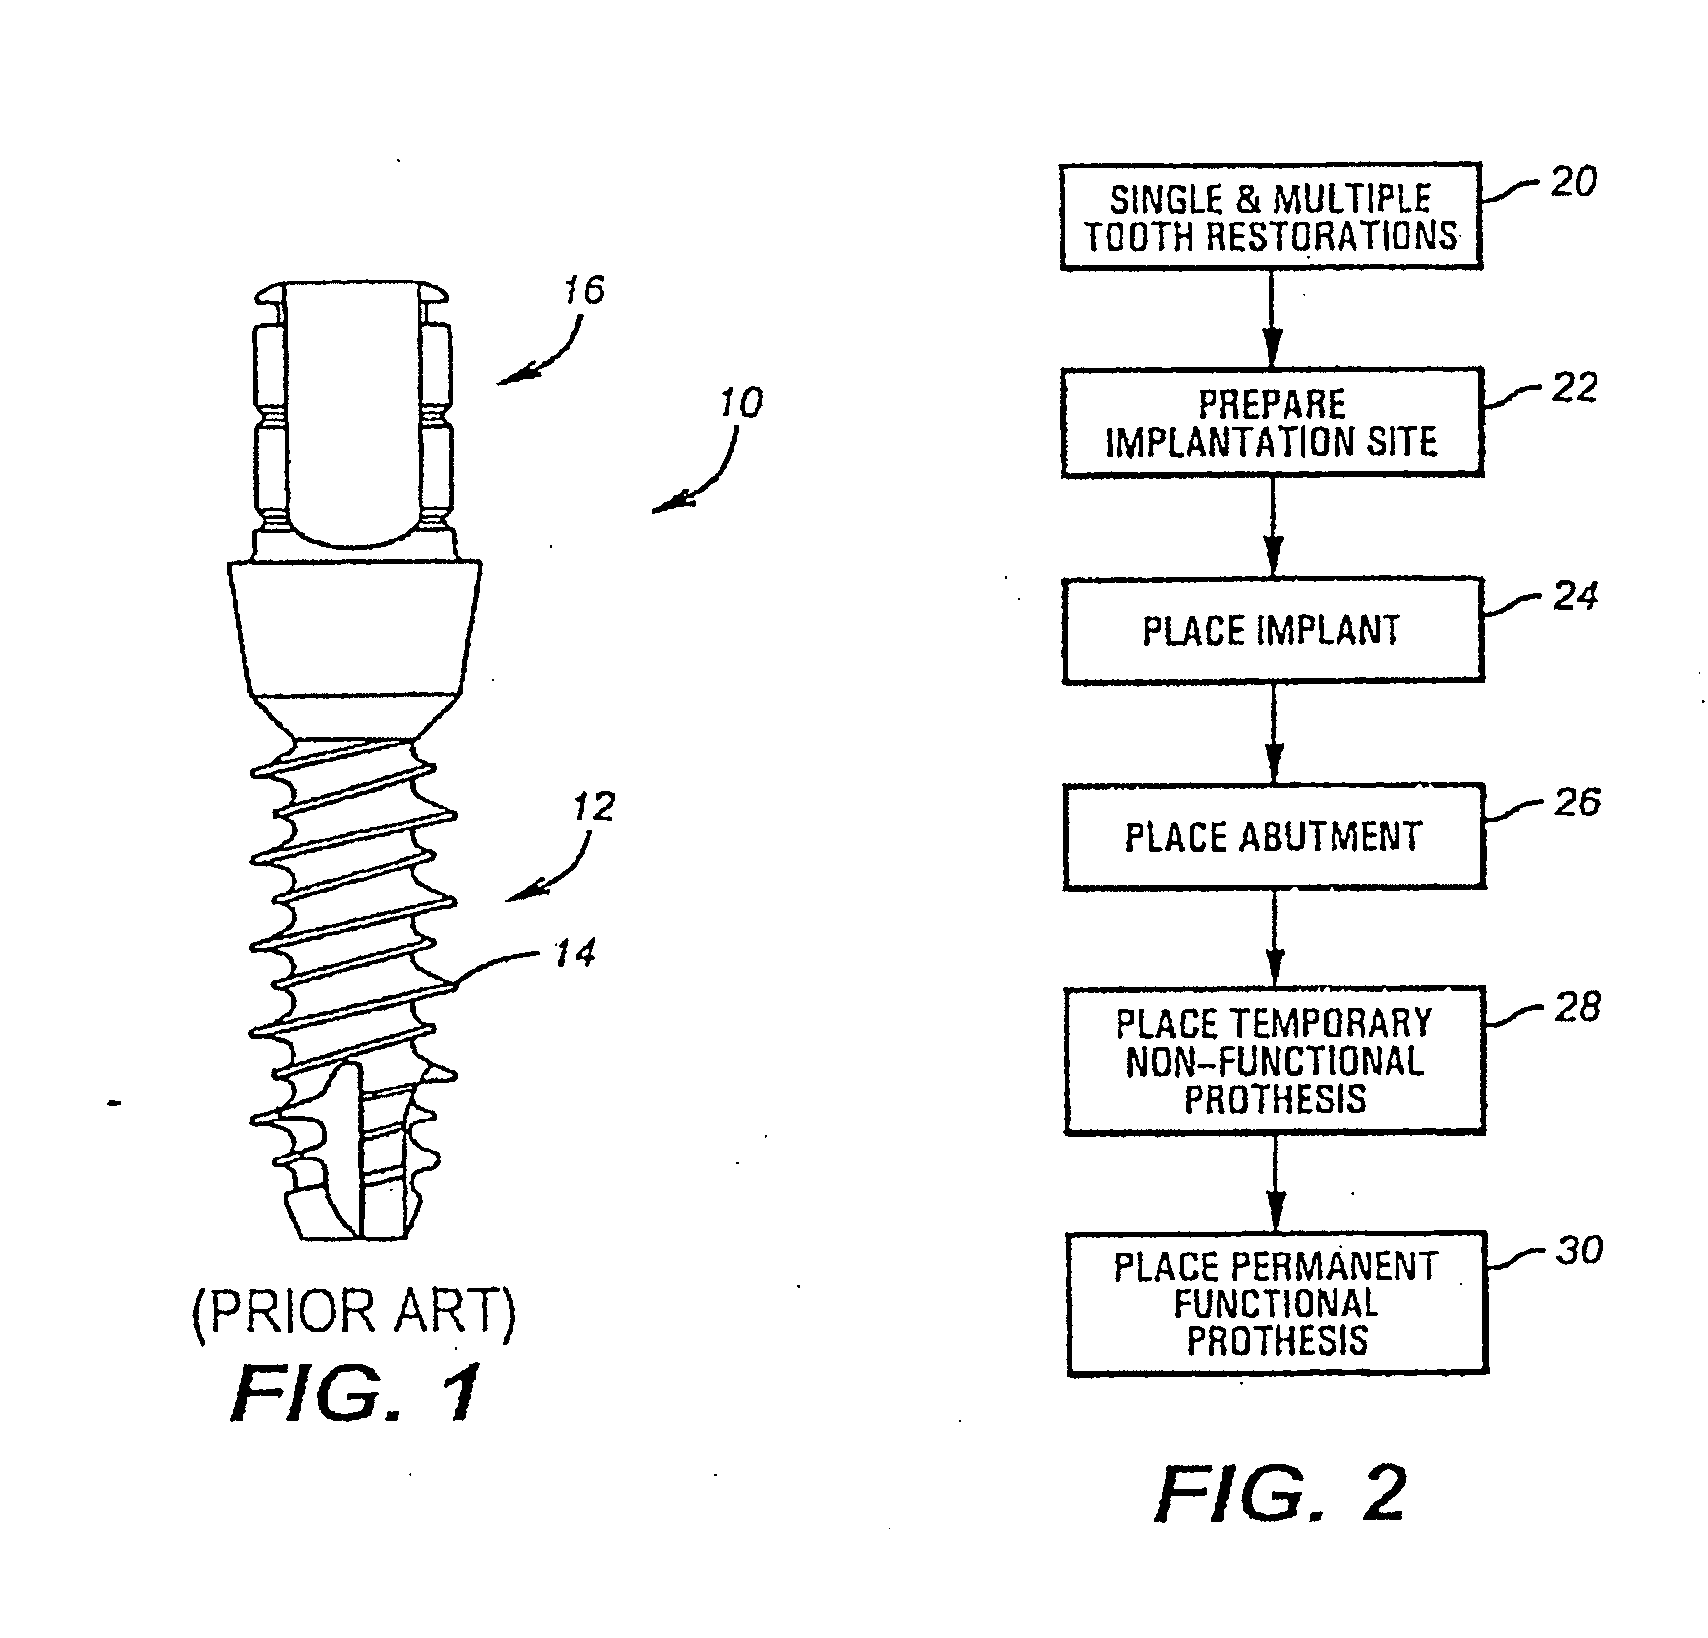 System for Immediately Placing a Non-Occlusive Dental Implant Prosthesis